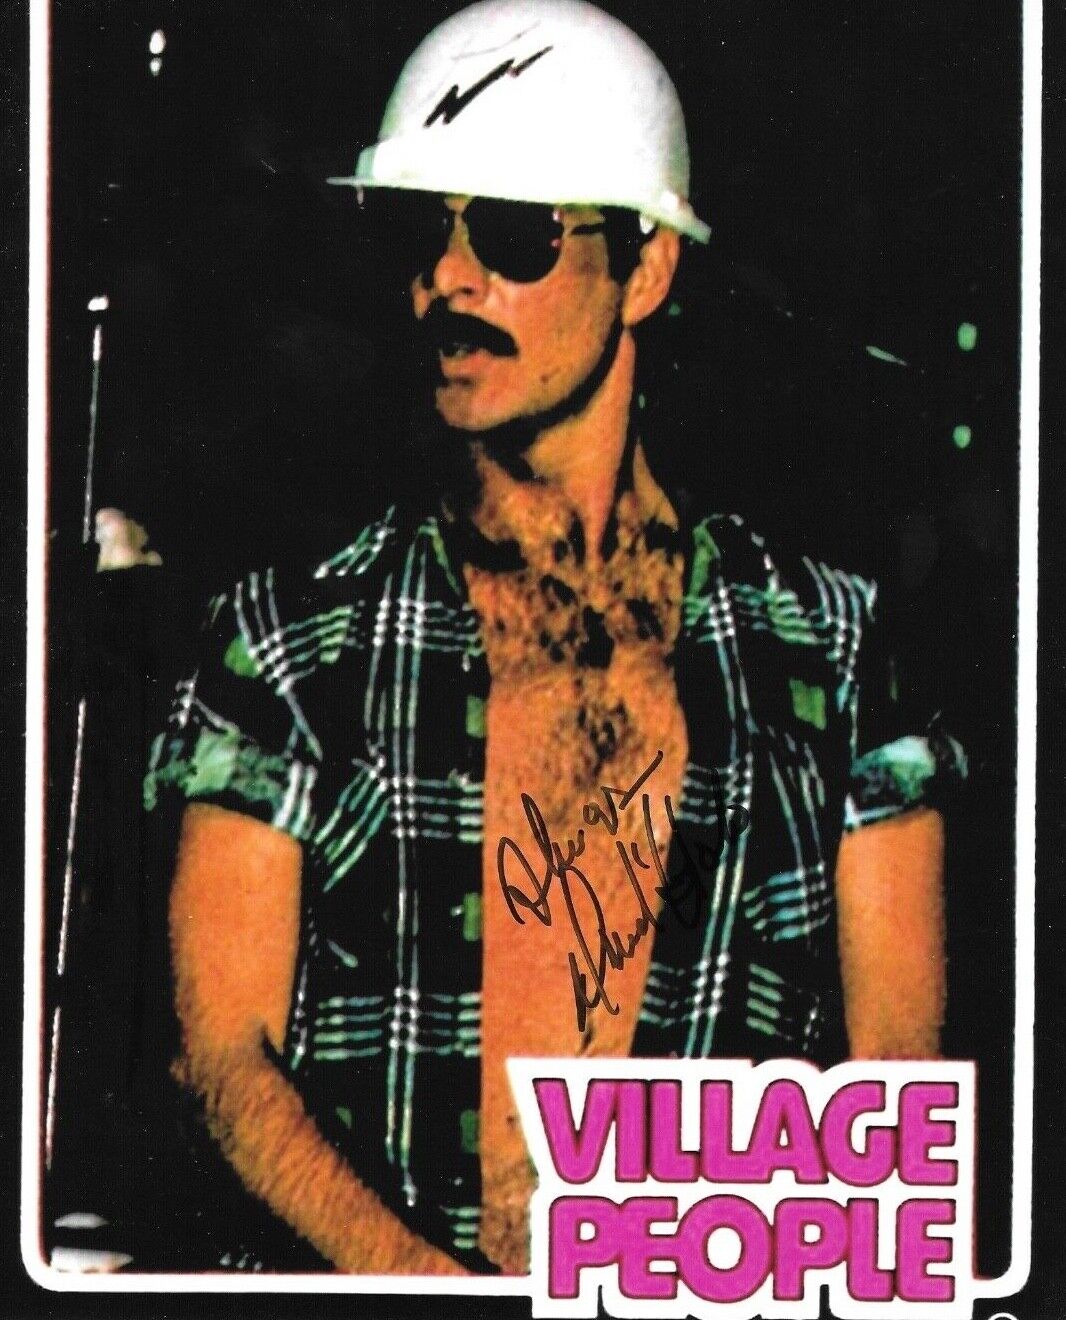 * DAVID HODO * signed 8x10 Photo Poster painting * VILLAGE PEOPLE CONSTRUCTION WORKER * COA * 1